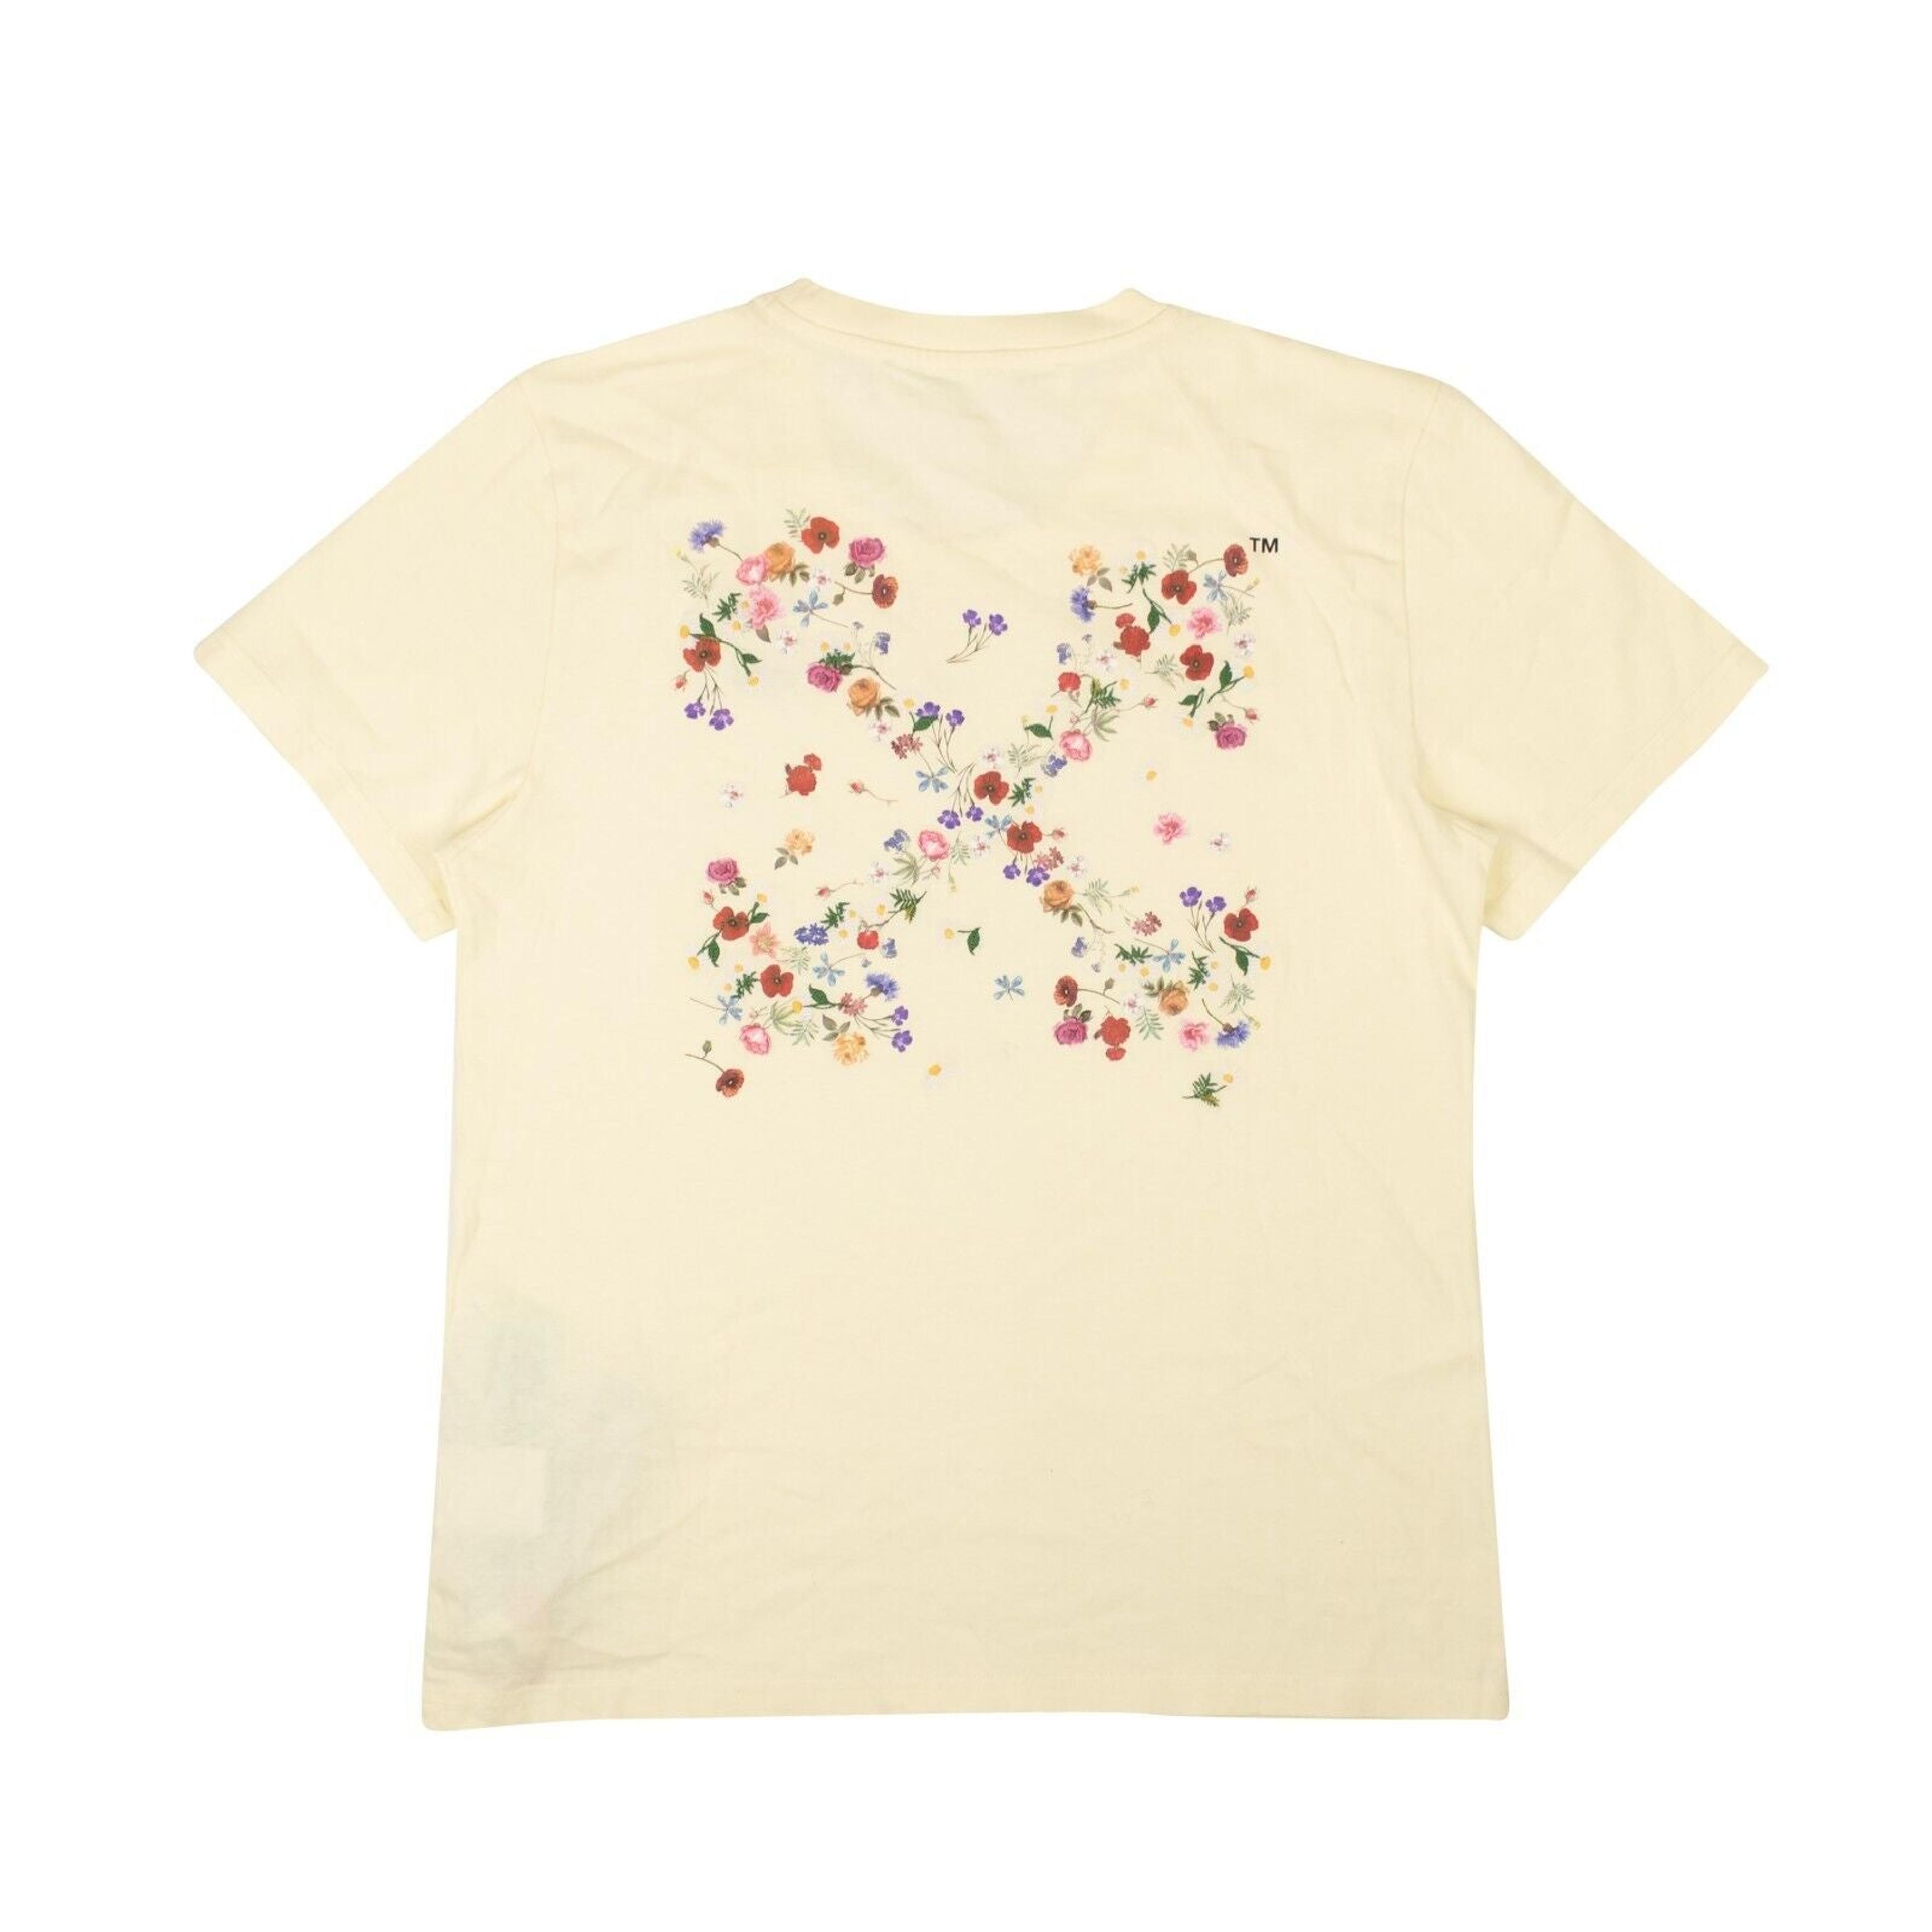 Alternate View 2 of Cream Floral Embroidered T-Shirt